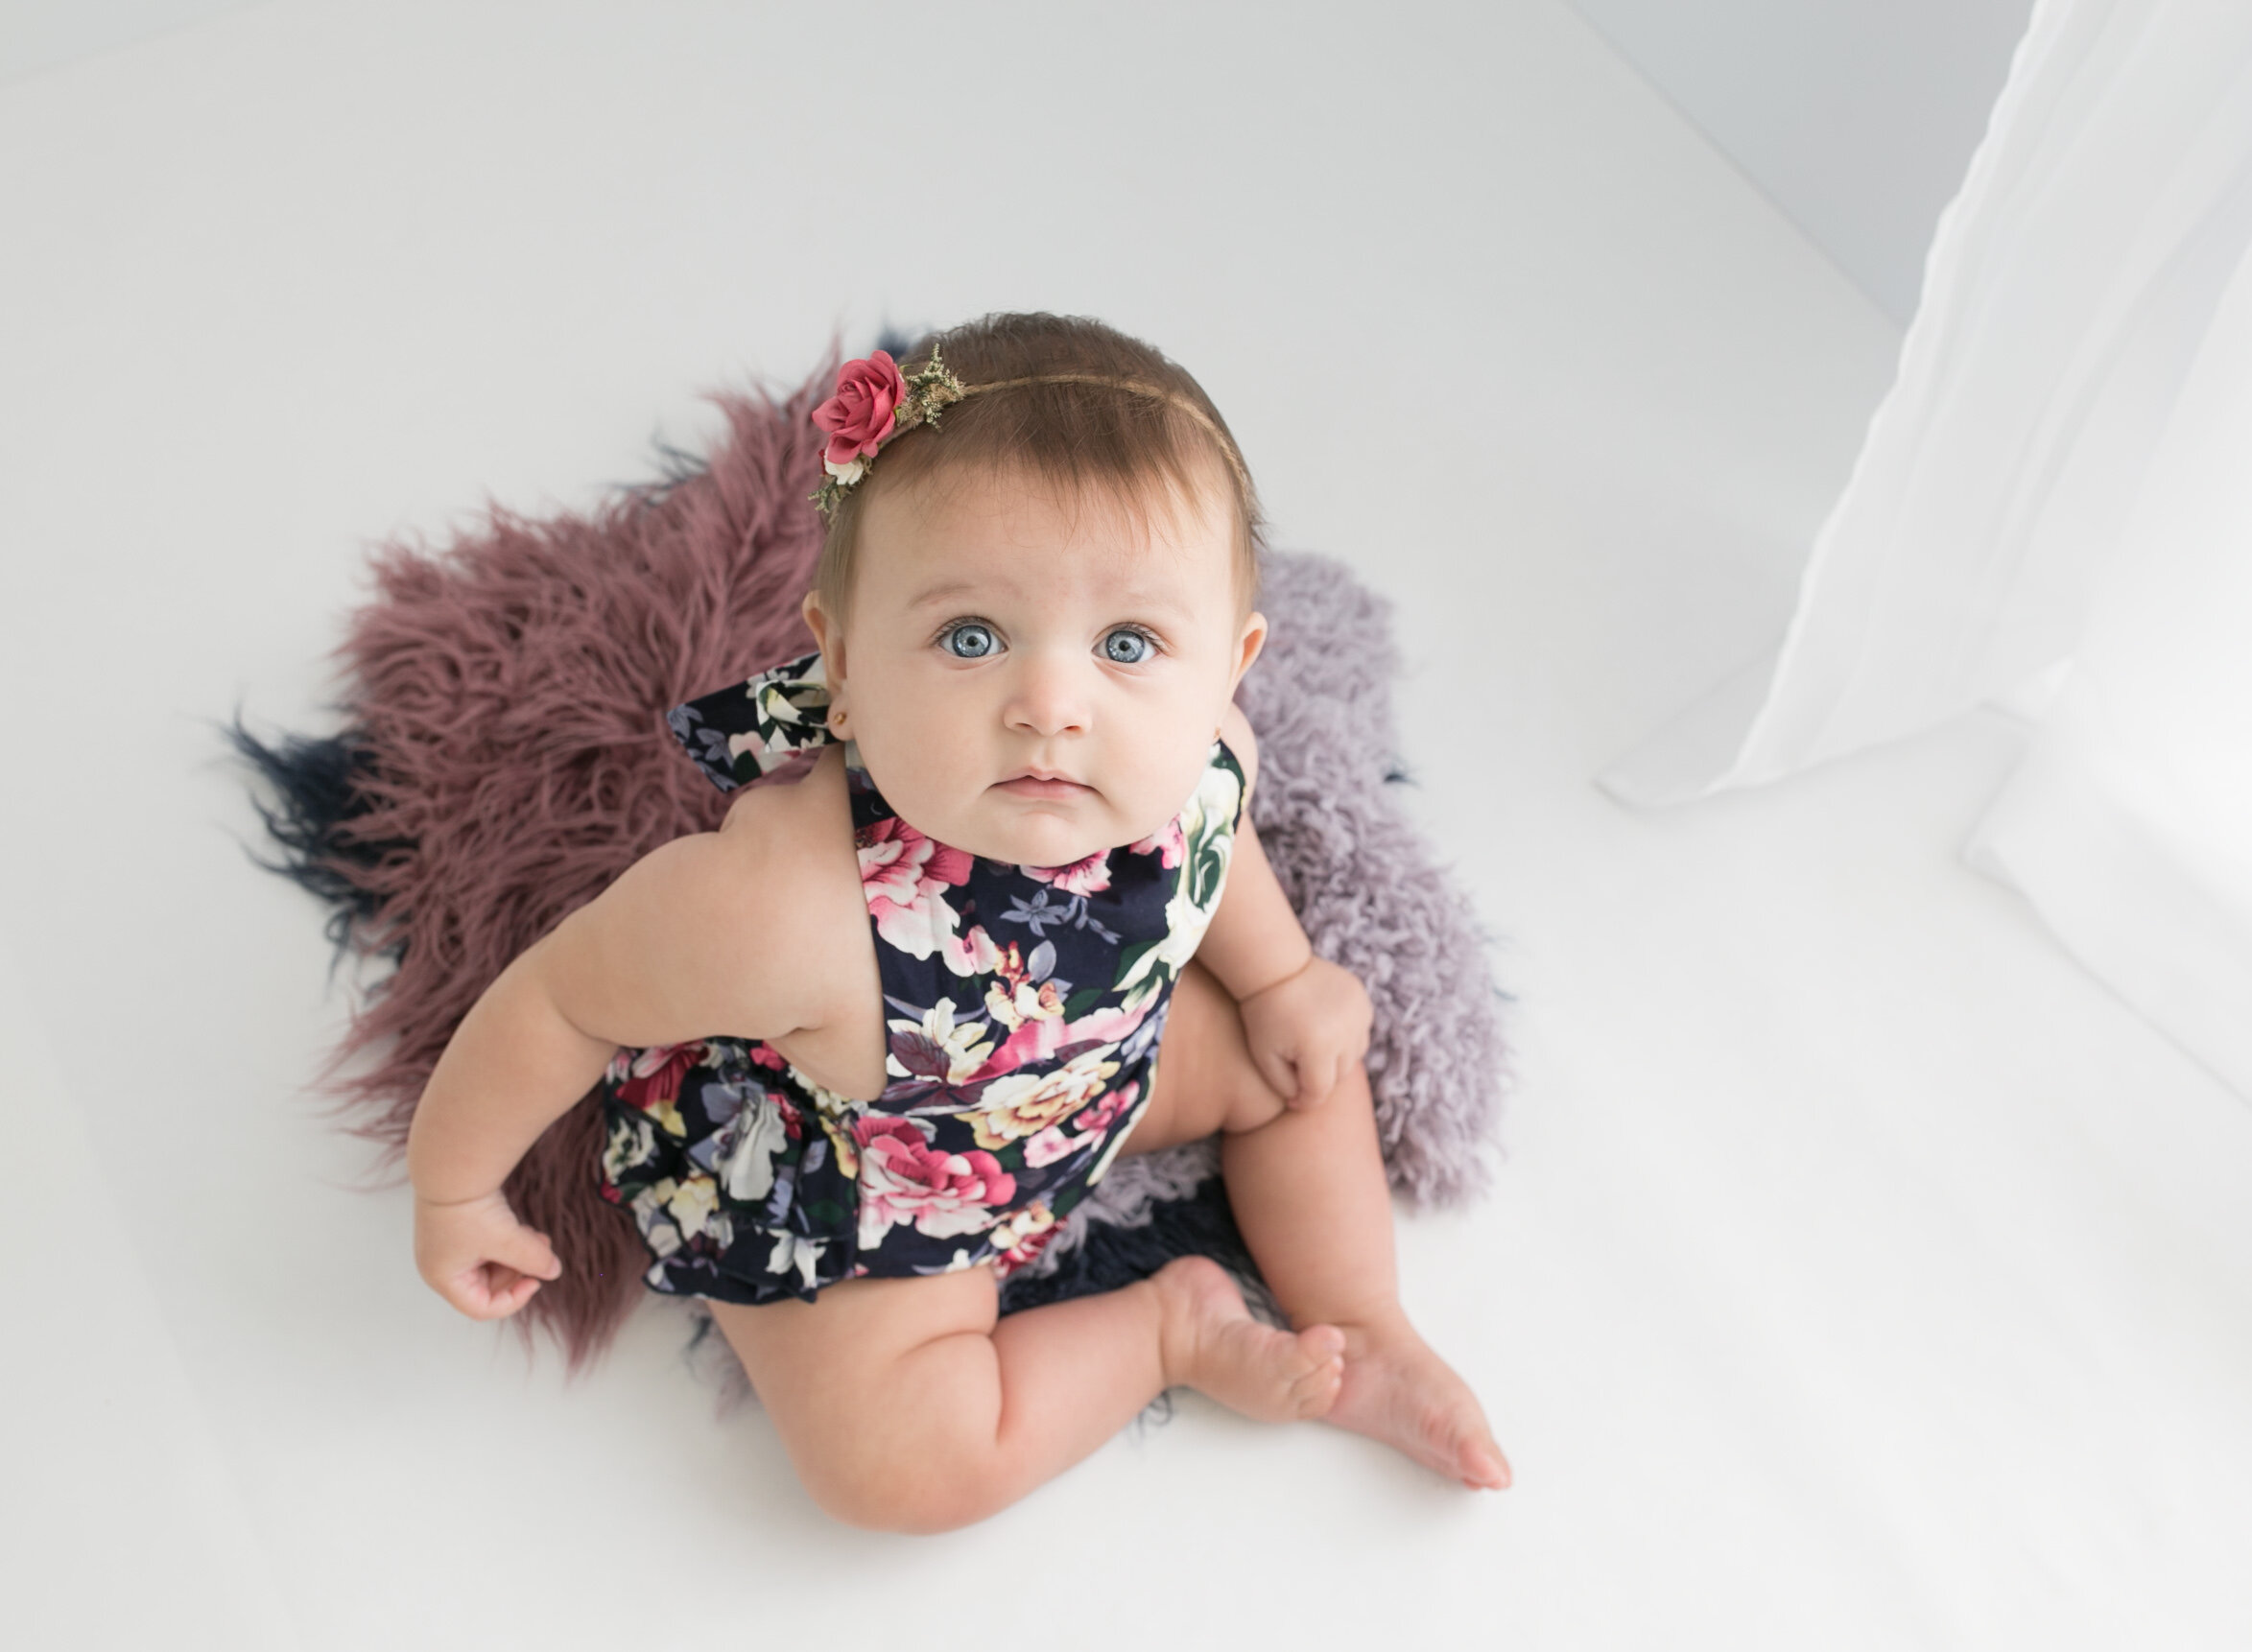 south florida baby photography - grow with me plan